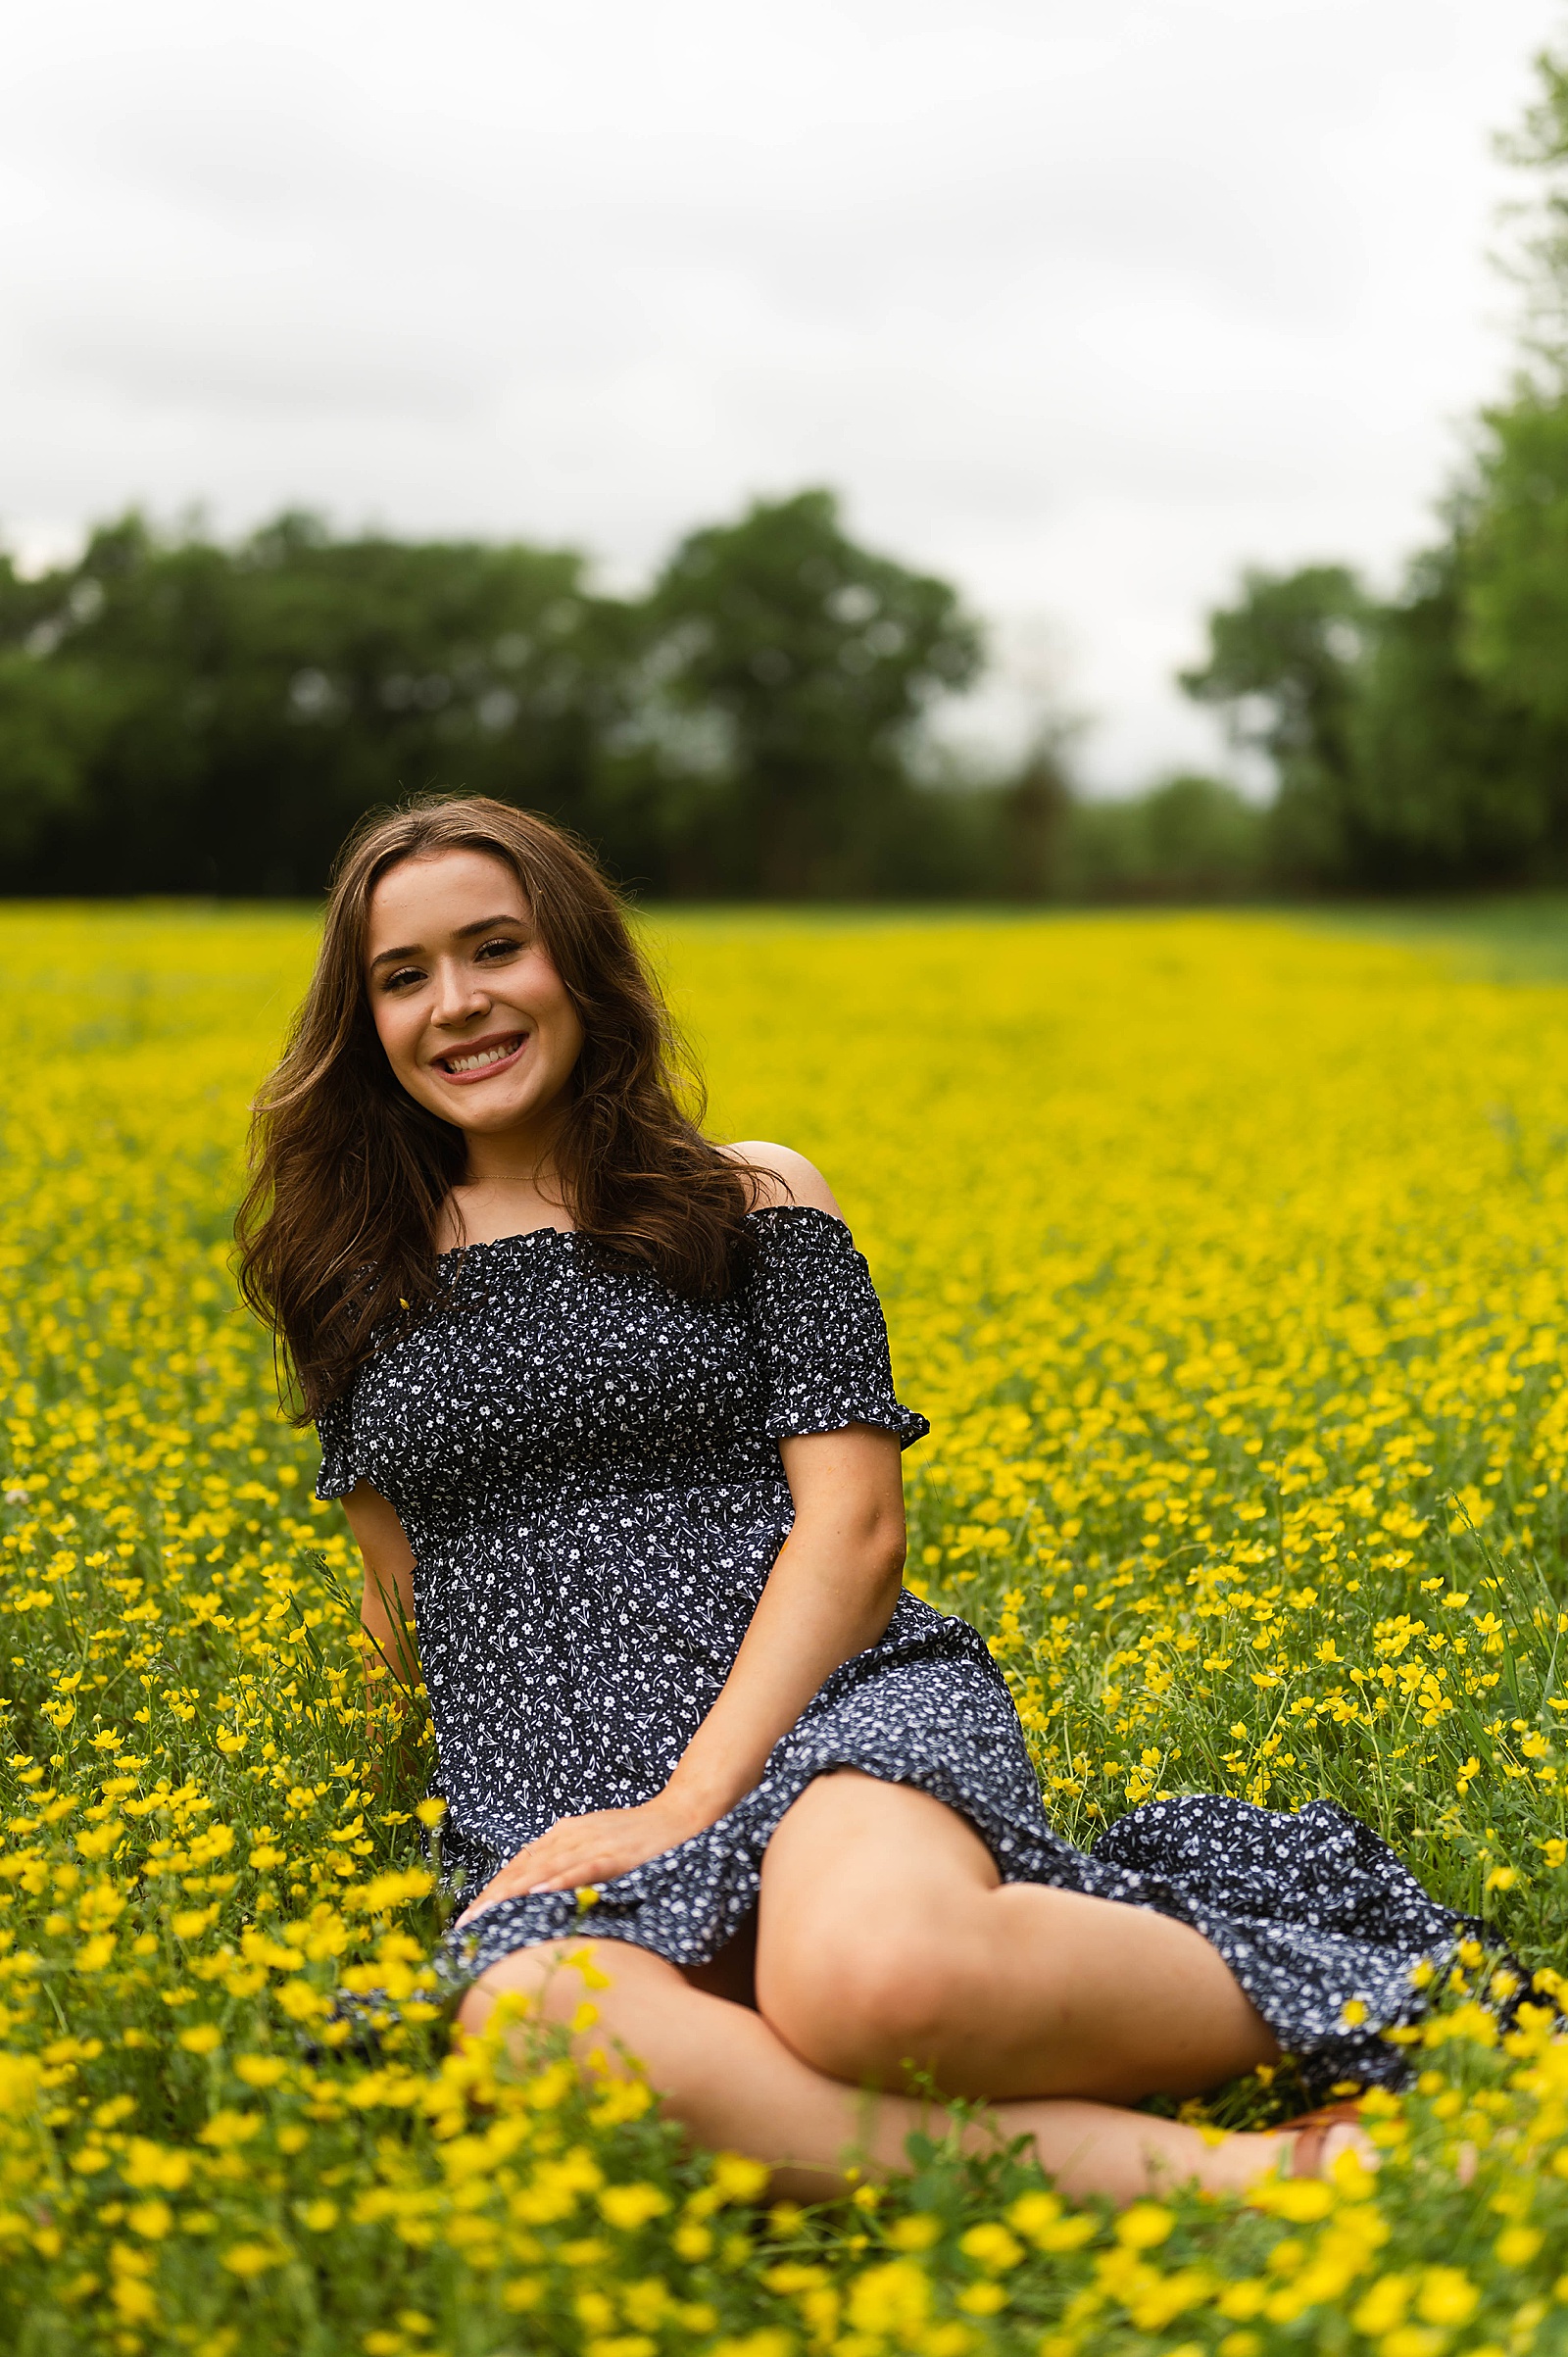 Brunette in navy dress sitting in a field for Spring Flowers portraits